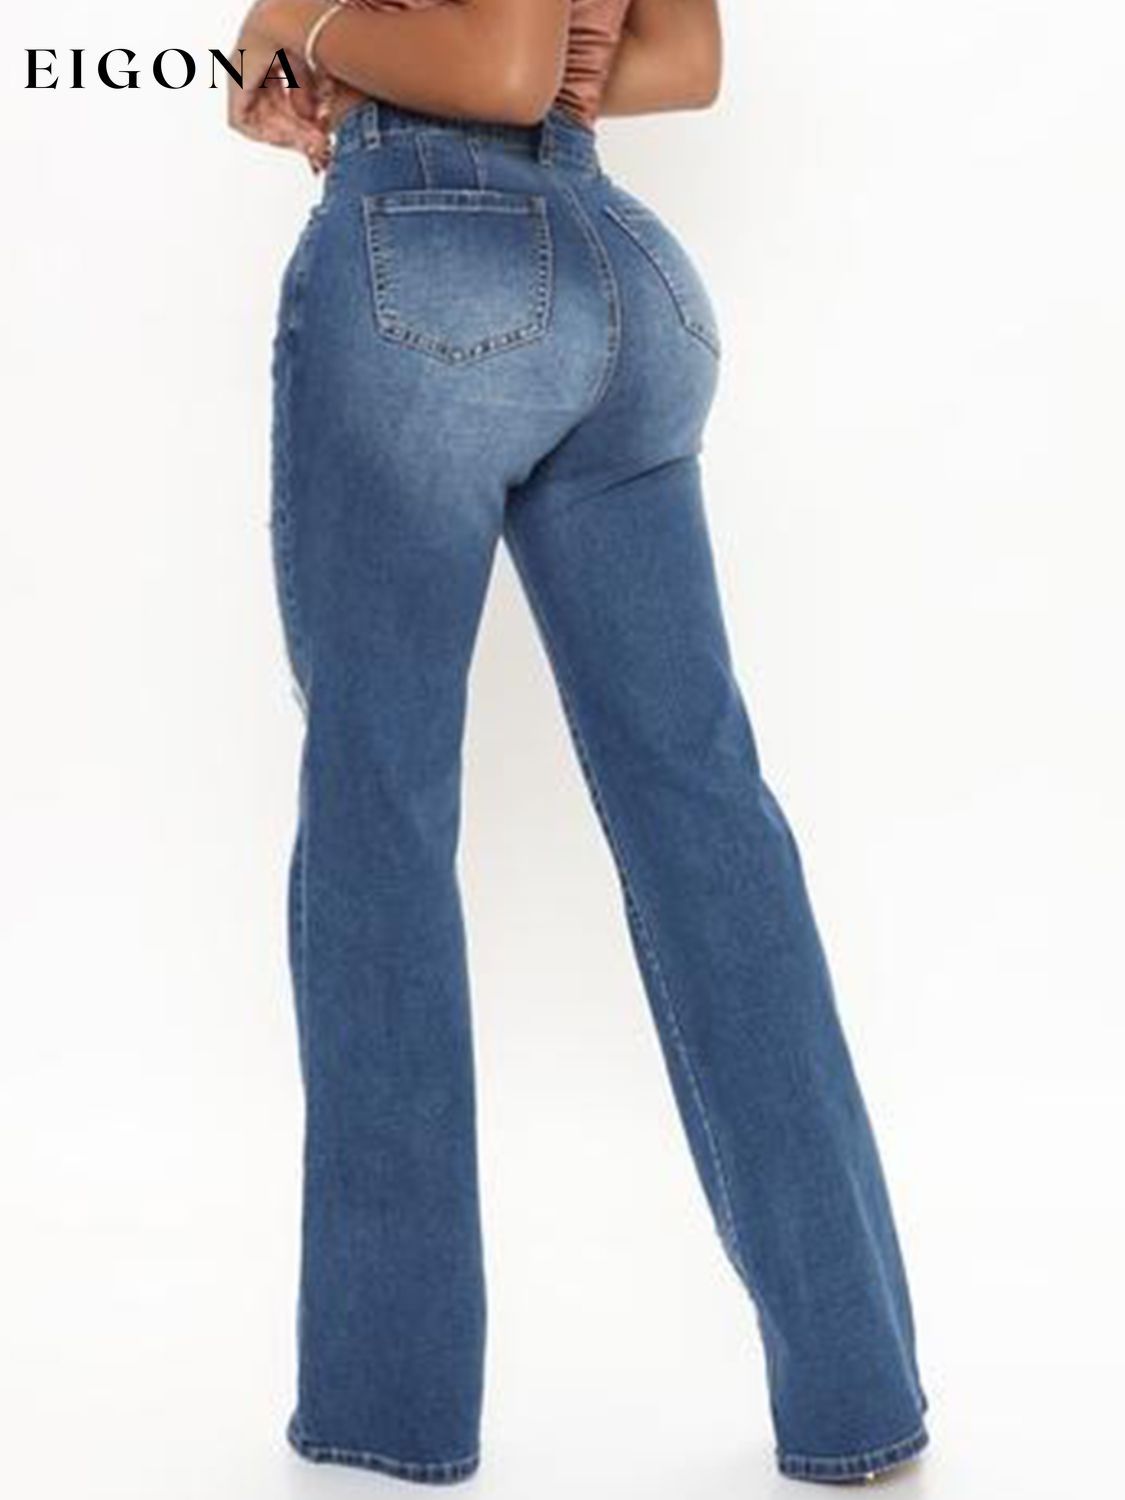 Raw Hem High Waist Flare Jeans bottoms clothes Jeans Ship From Overseas Shipping Delay 10/01/2023 - 10/03/2023 Y.Y@Denim